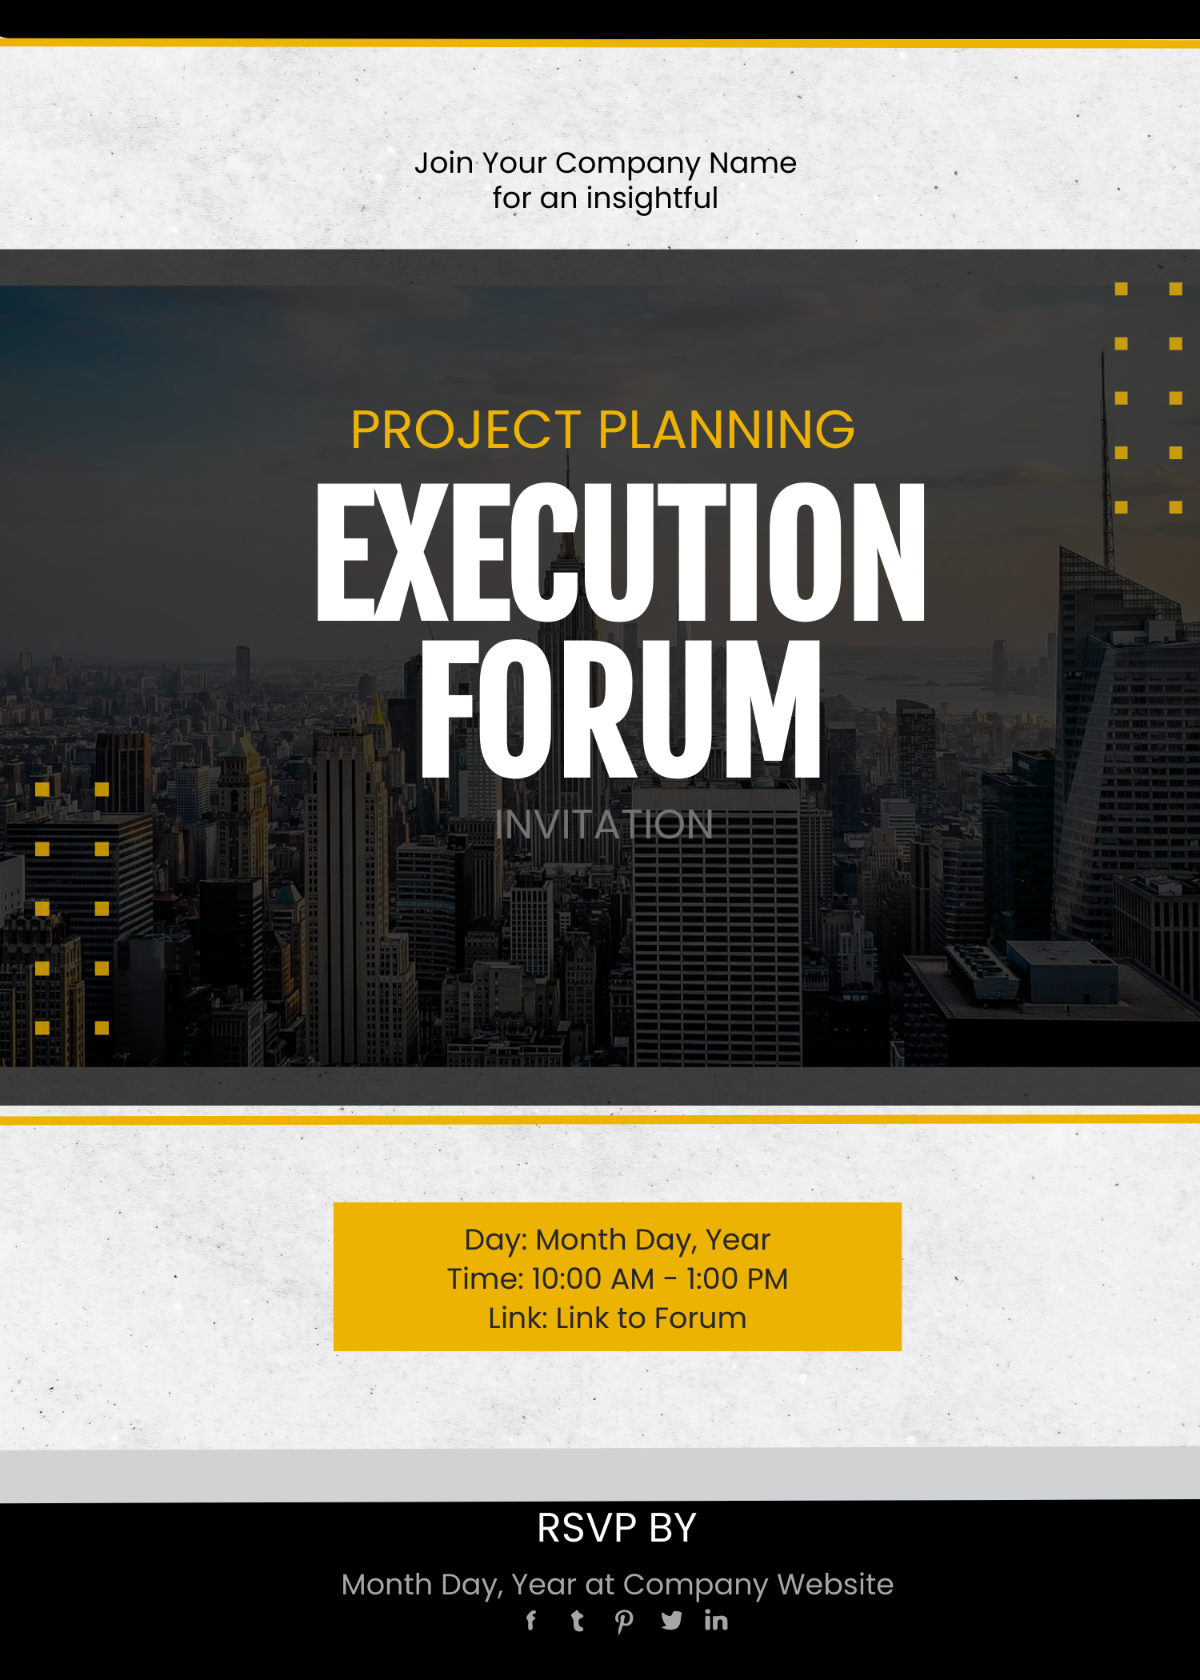 Free Project Planning and Execution Forum Invitation Card Template